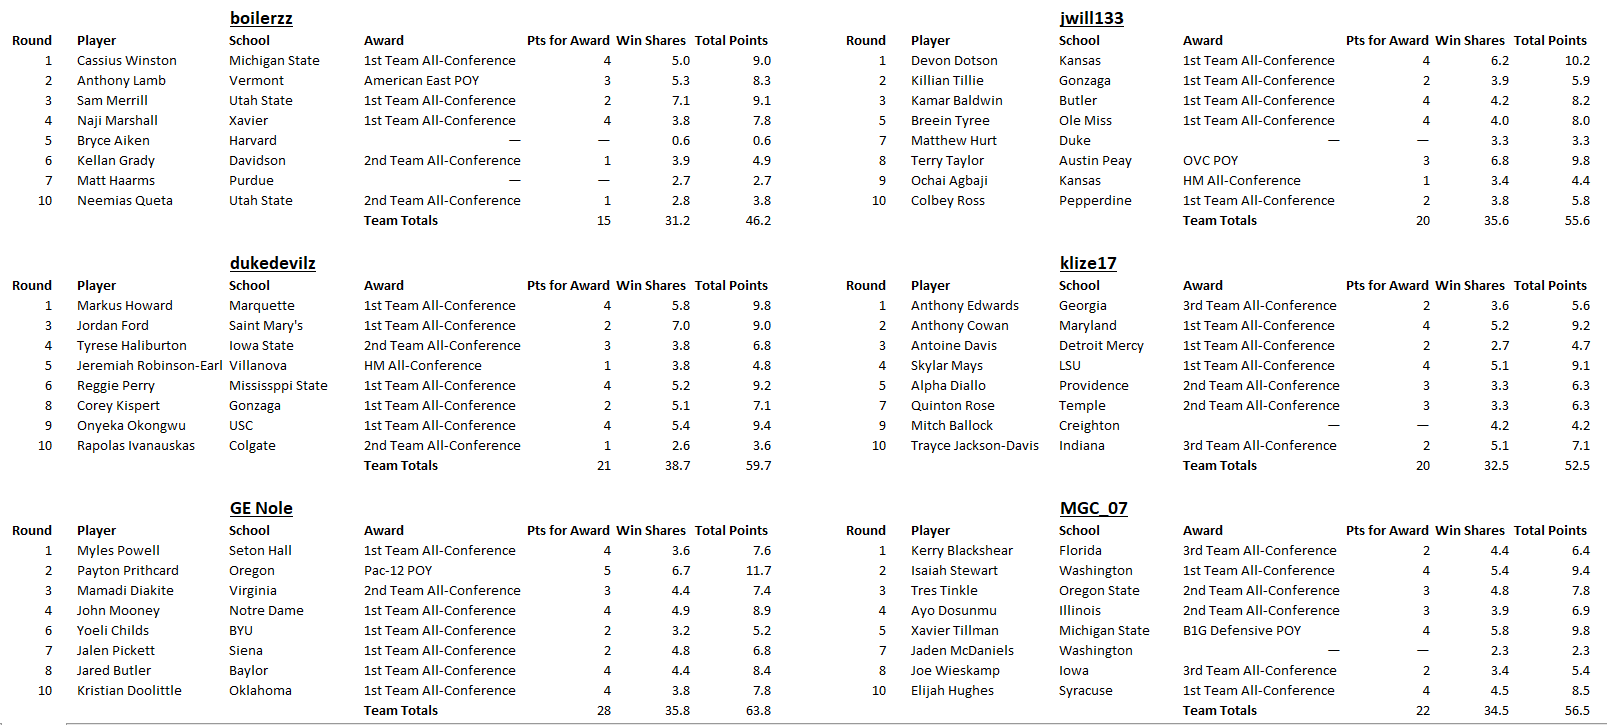 draft-standings-march2020.png